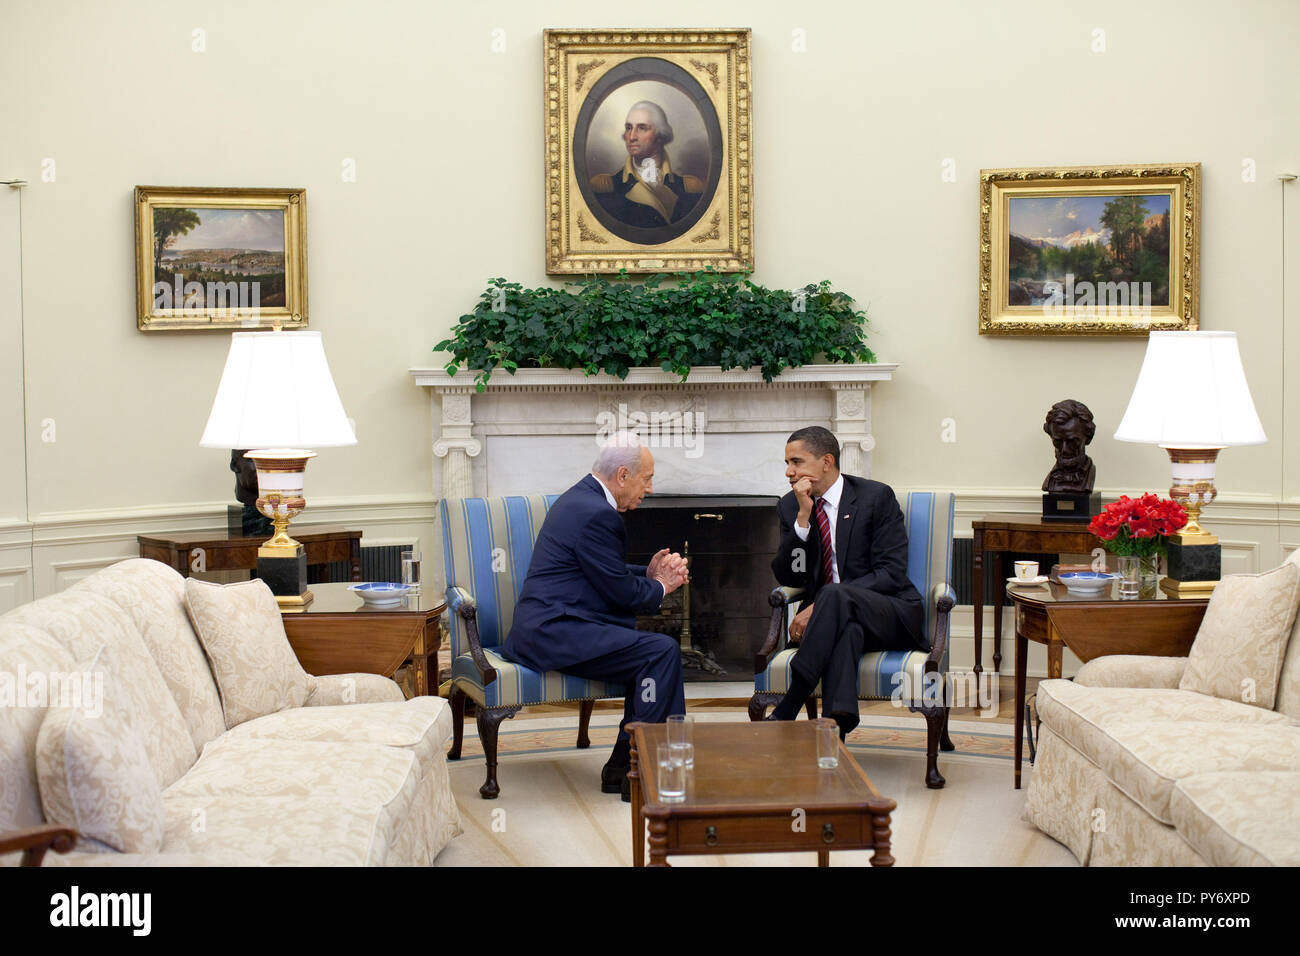 President Barack Obama meets with Israeli President Shimon Peres in the Oval Office Tuesday, May 5, 2009.   Official White House Photo by Pete Souza Stock Photo